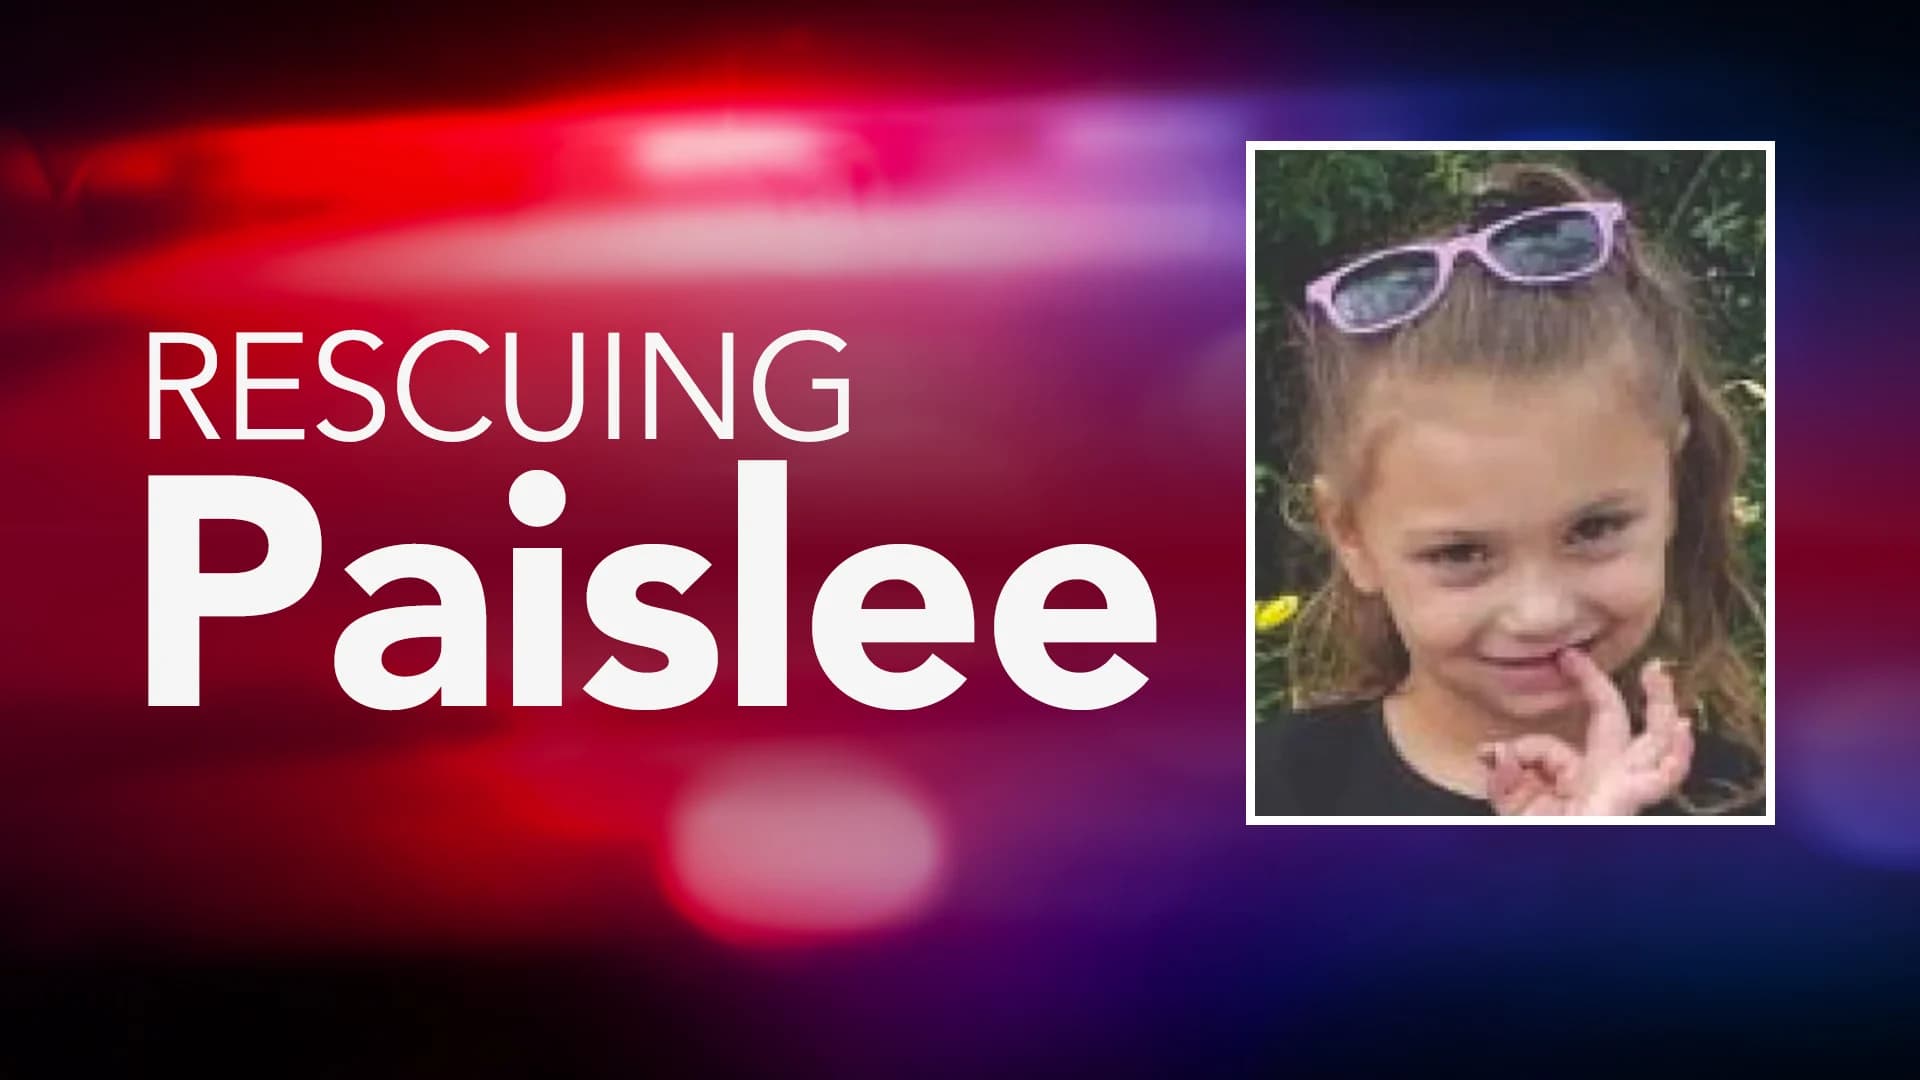 LIVE UPDATES: Paislee Shultis case 